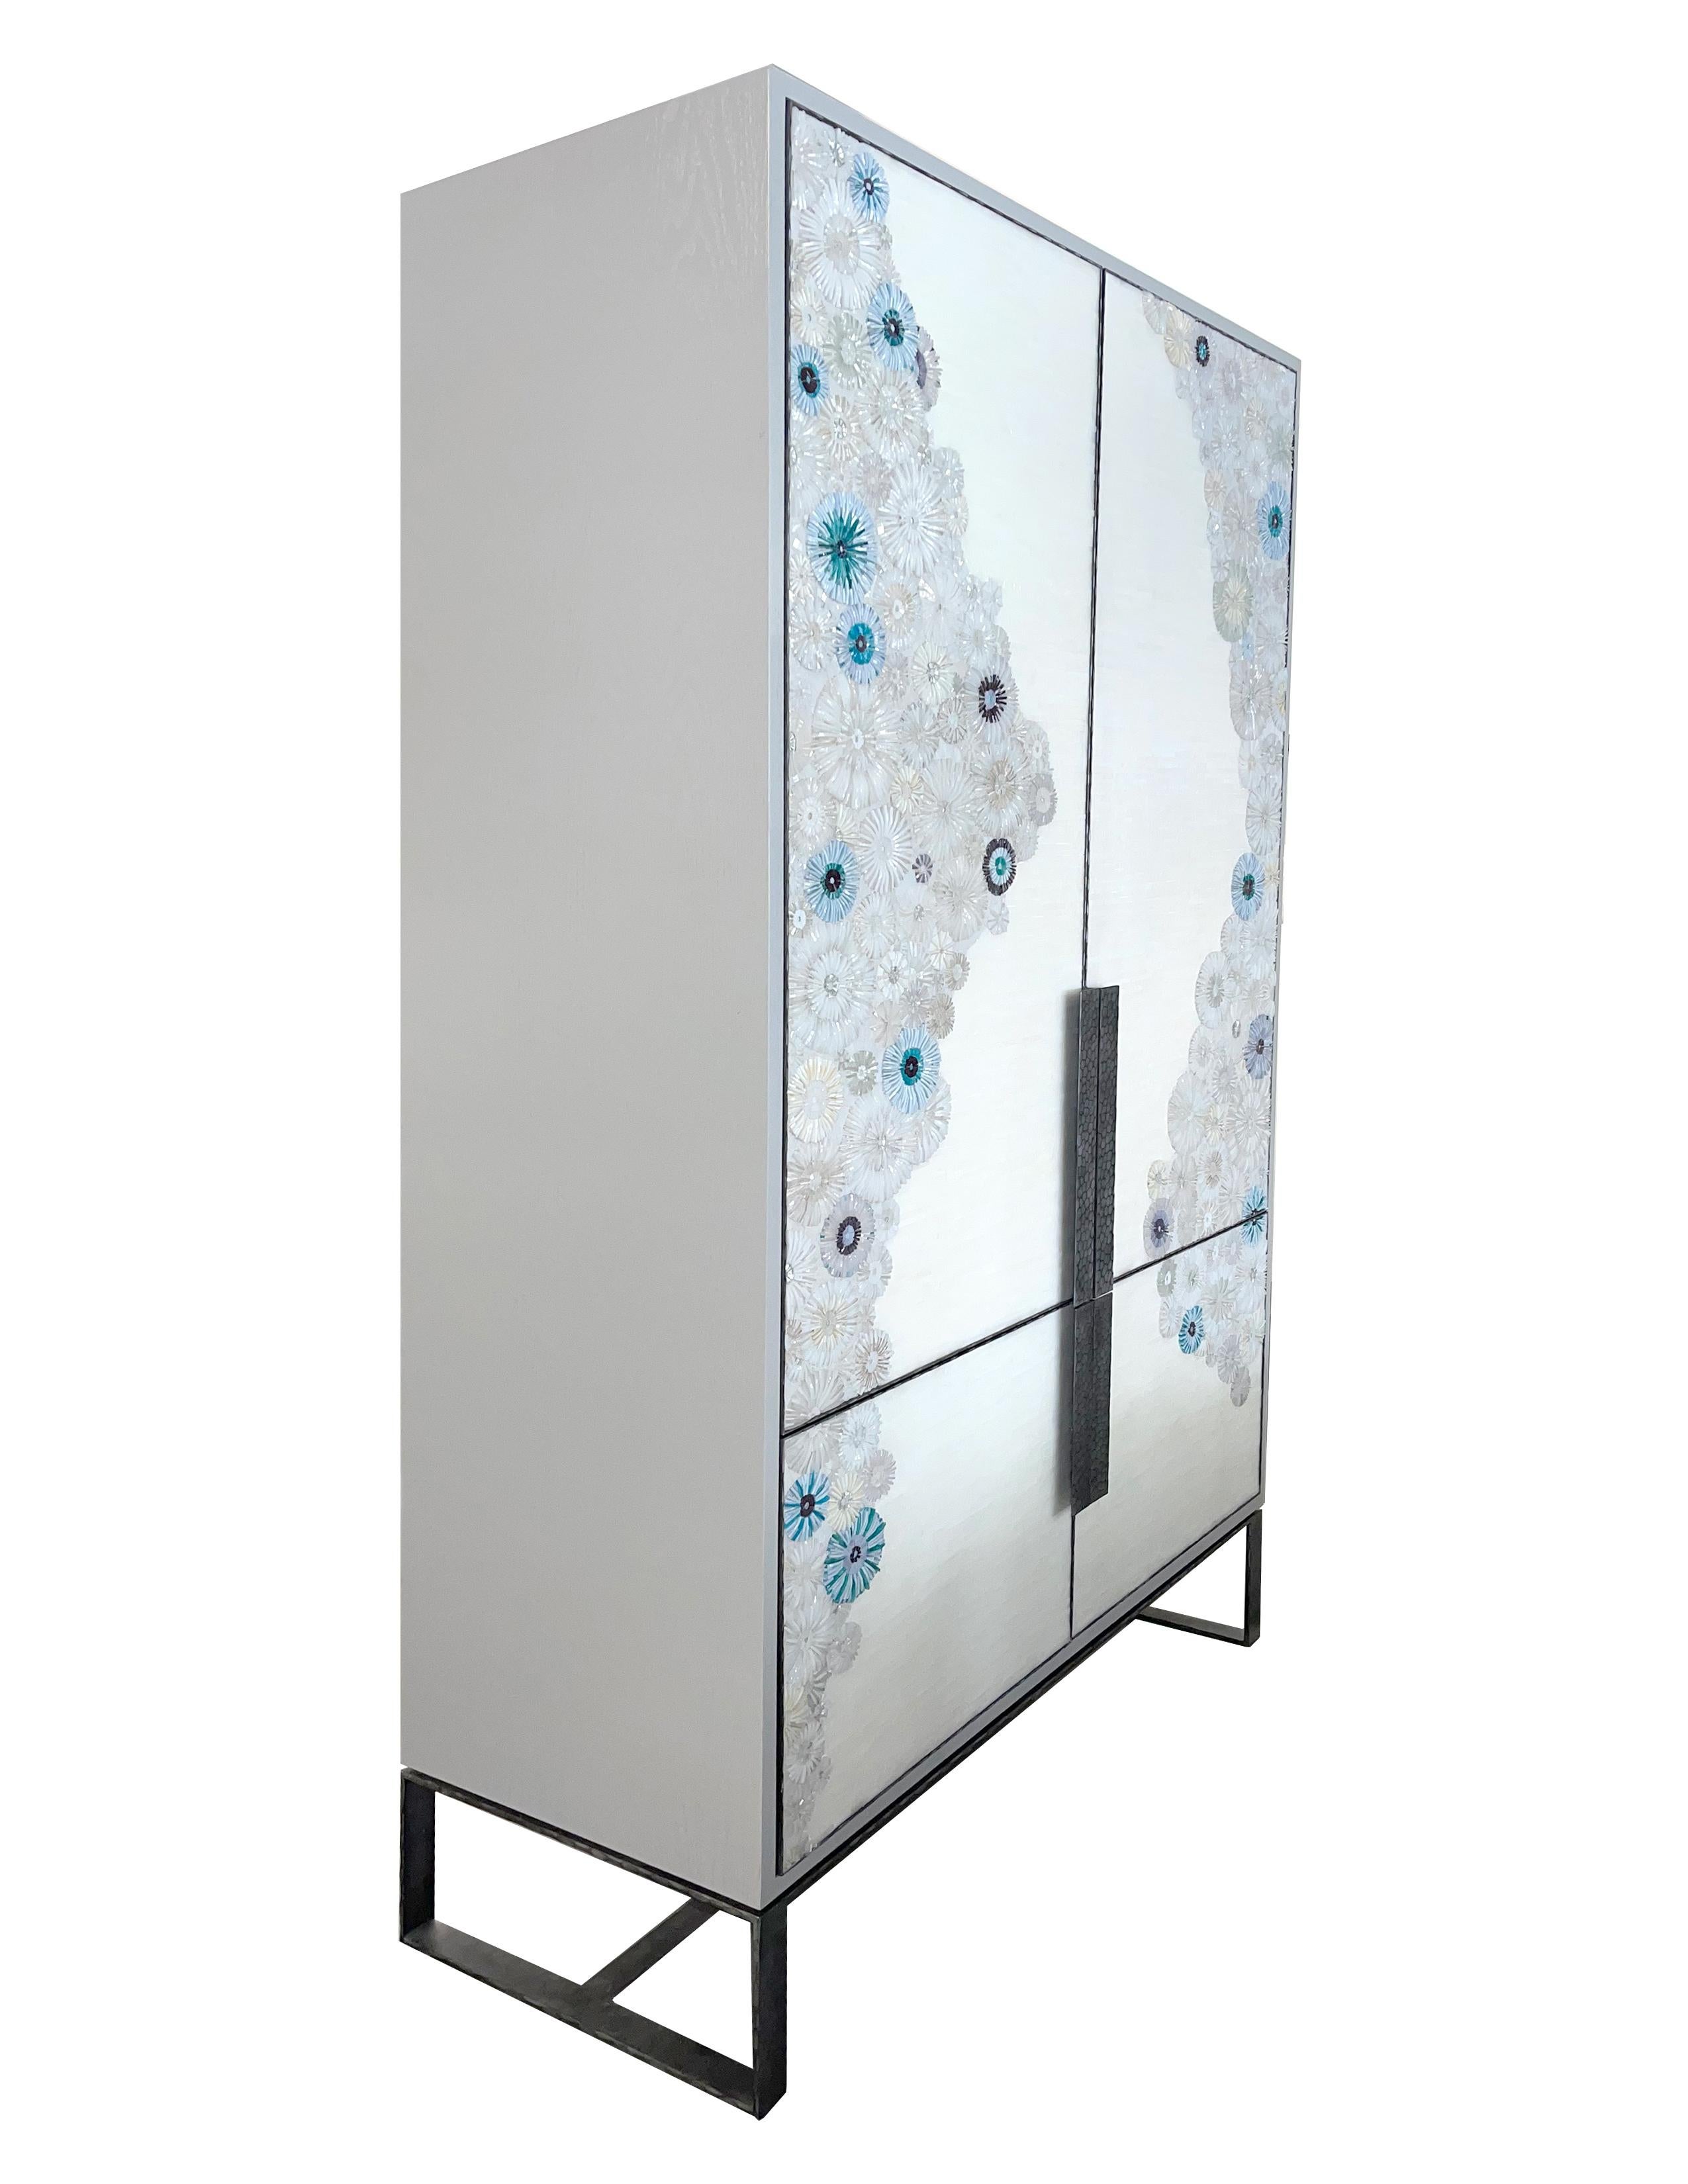 The custom Blossom Armoire by Ercole Home, is a 2-door armoire framed in hand hammered pewter metal as well as the handles. The doors are adorned in our hand cut mosaic Blossom Pattern. This mosaic consists of mixtures of whites, silvers, and wispy